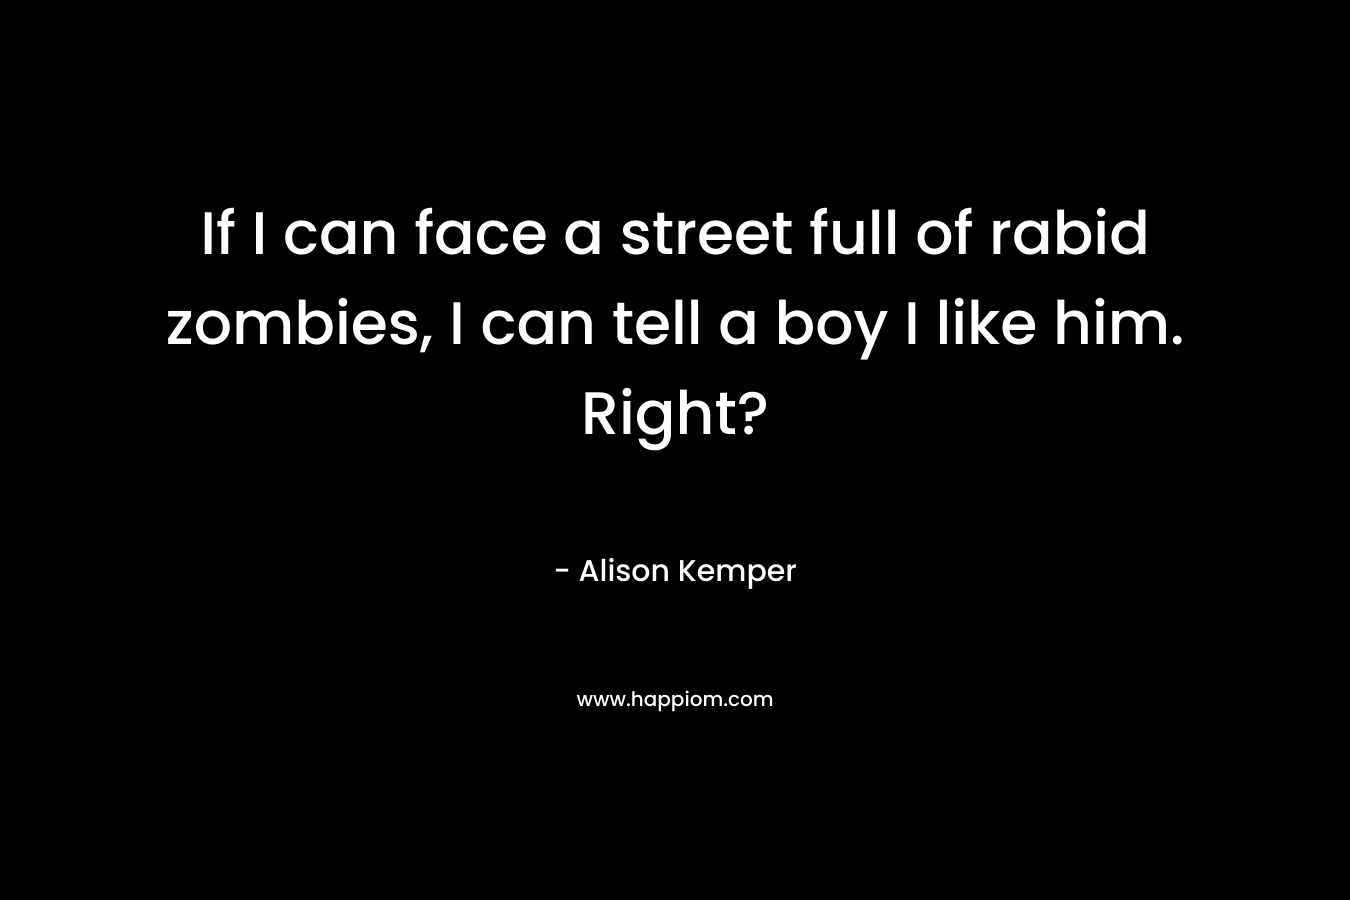 If I can face a street full of rabid zombies, I can tell a boy I like him. Right? – Alison Kemper